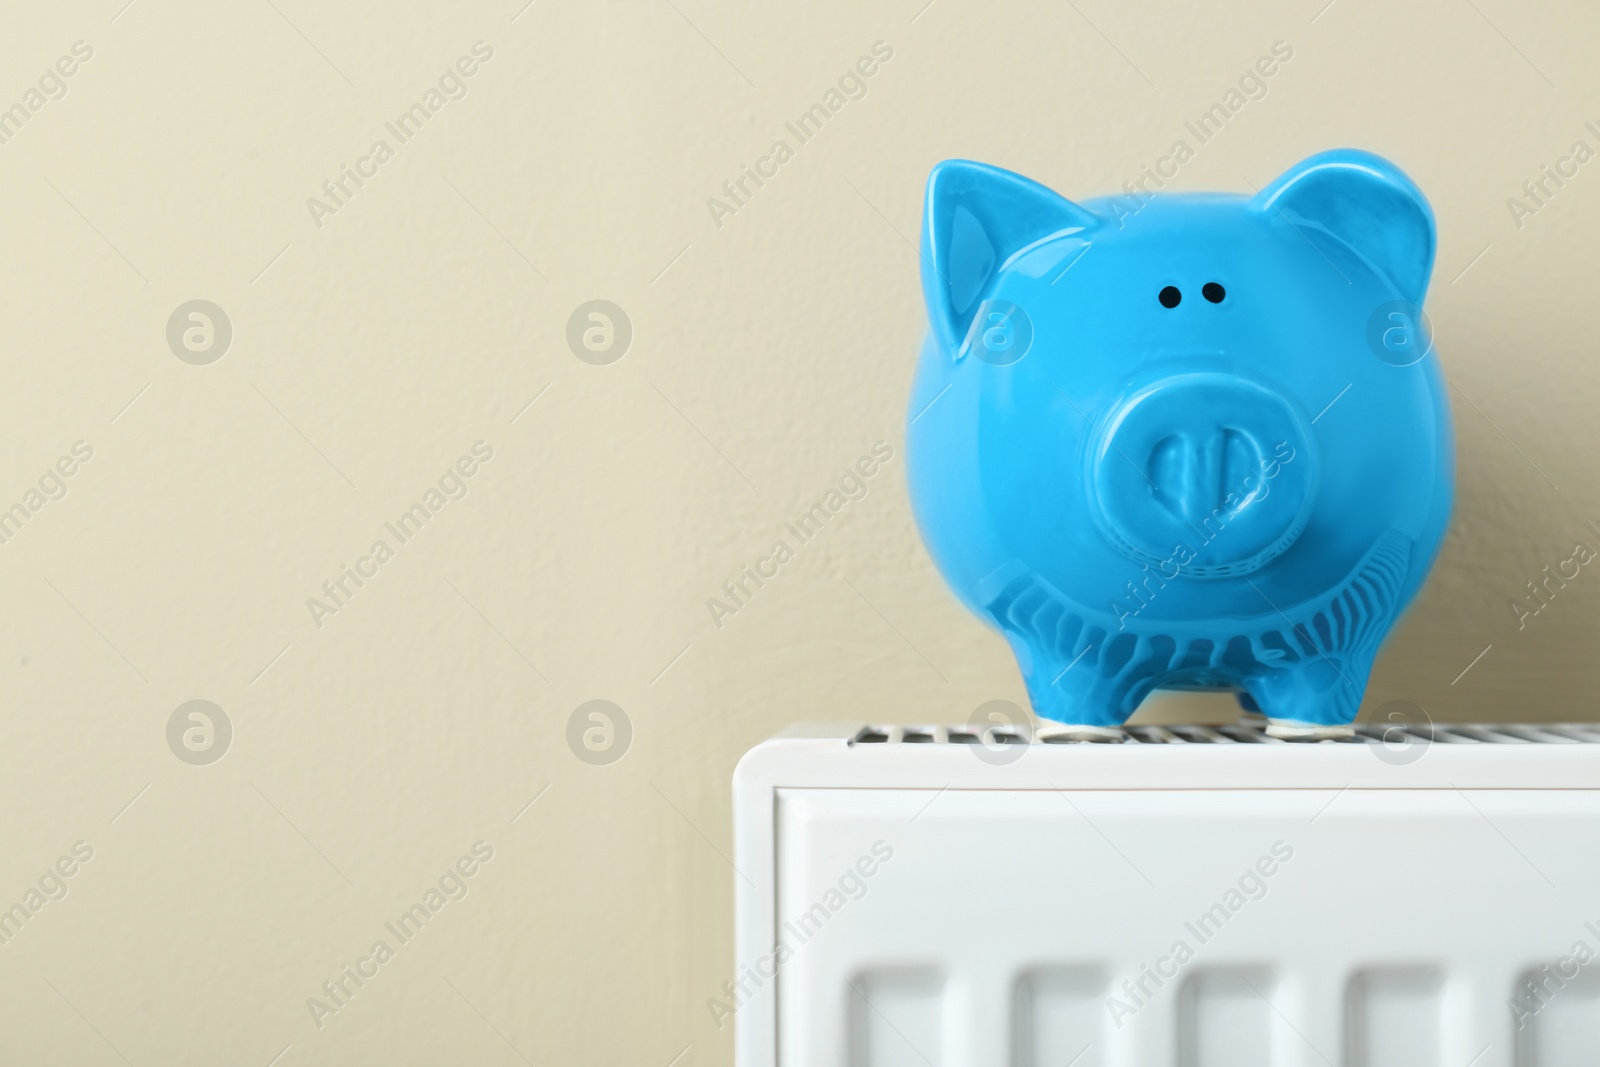 Photo of Piggy bank on heating radiator against beige background, space for text